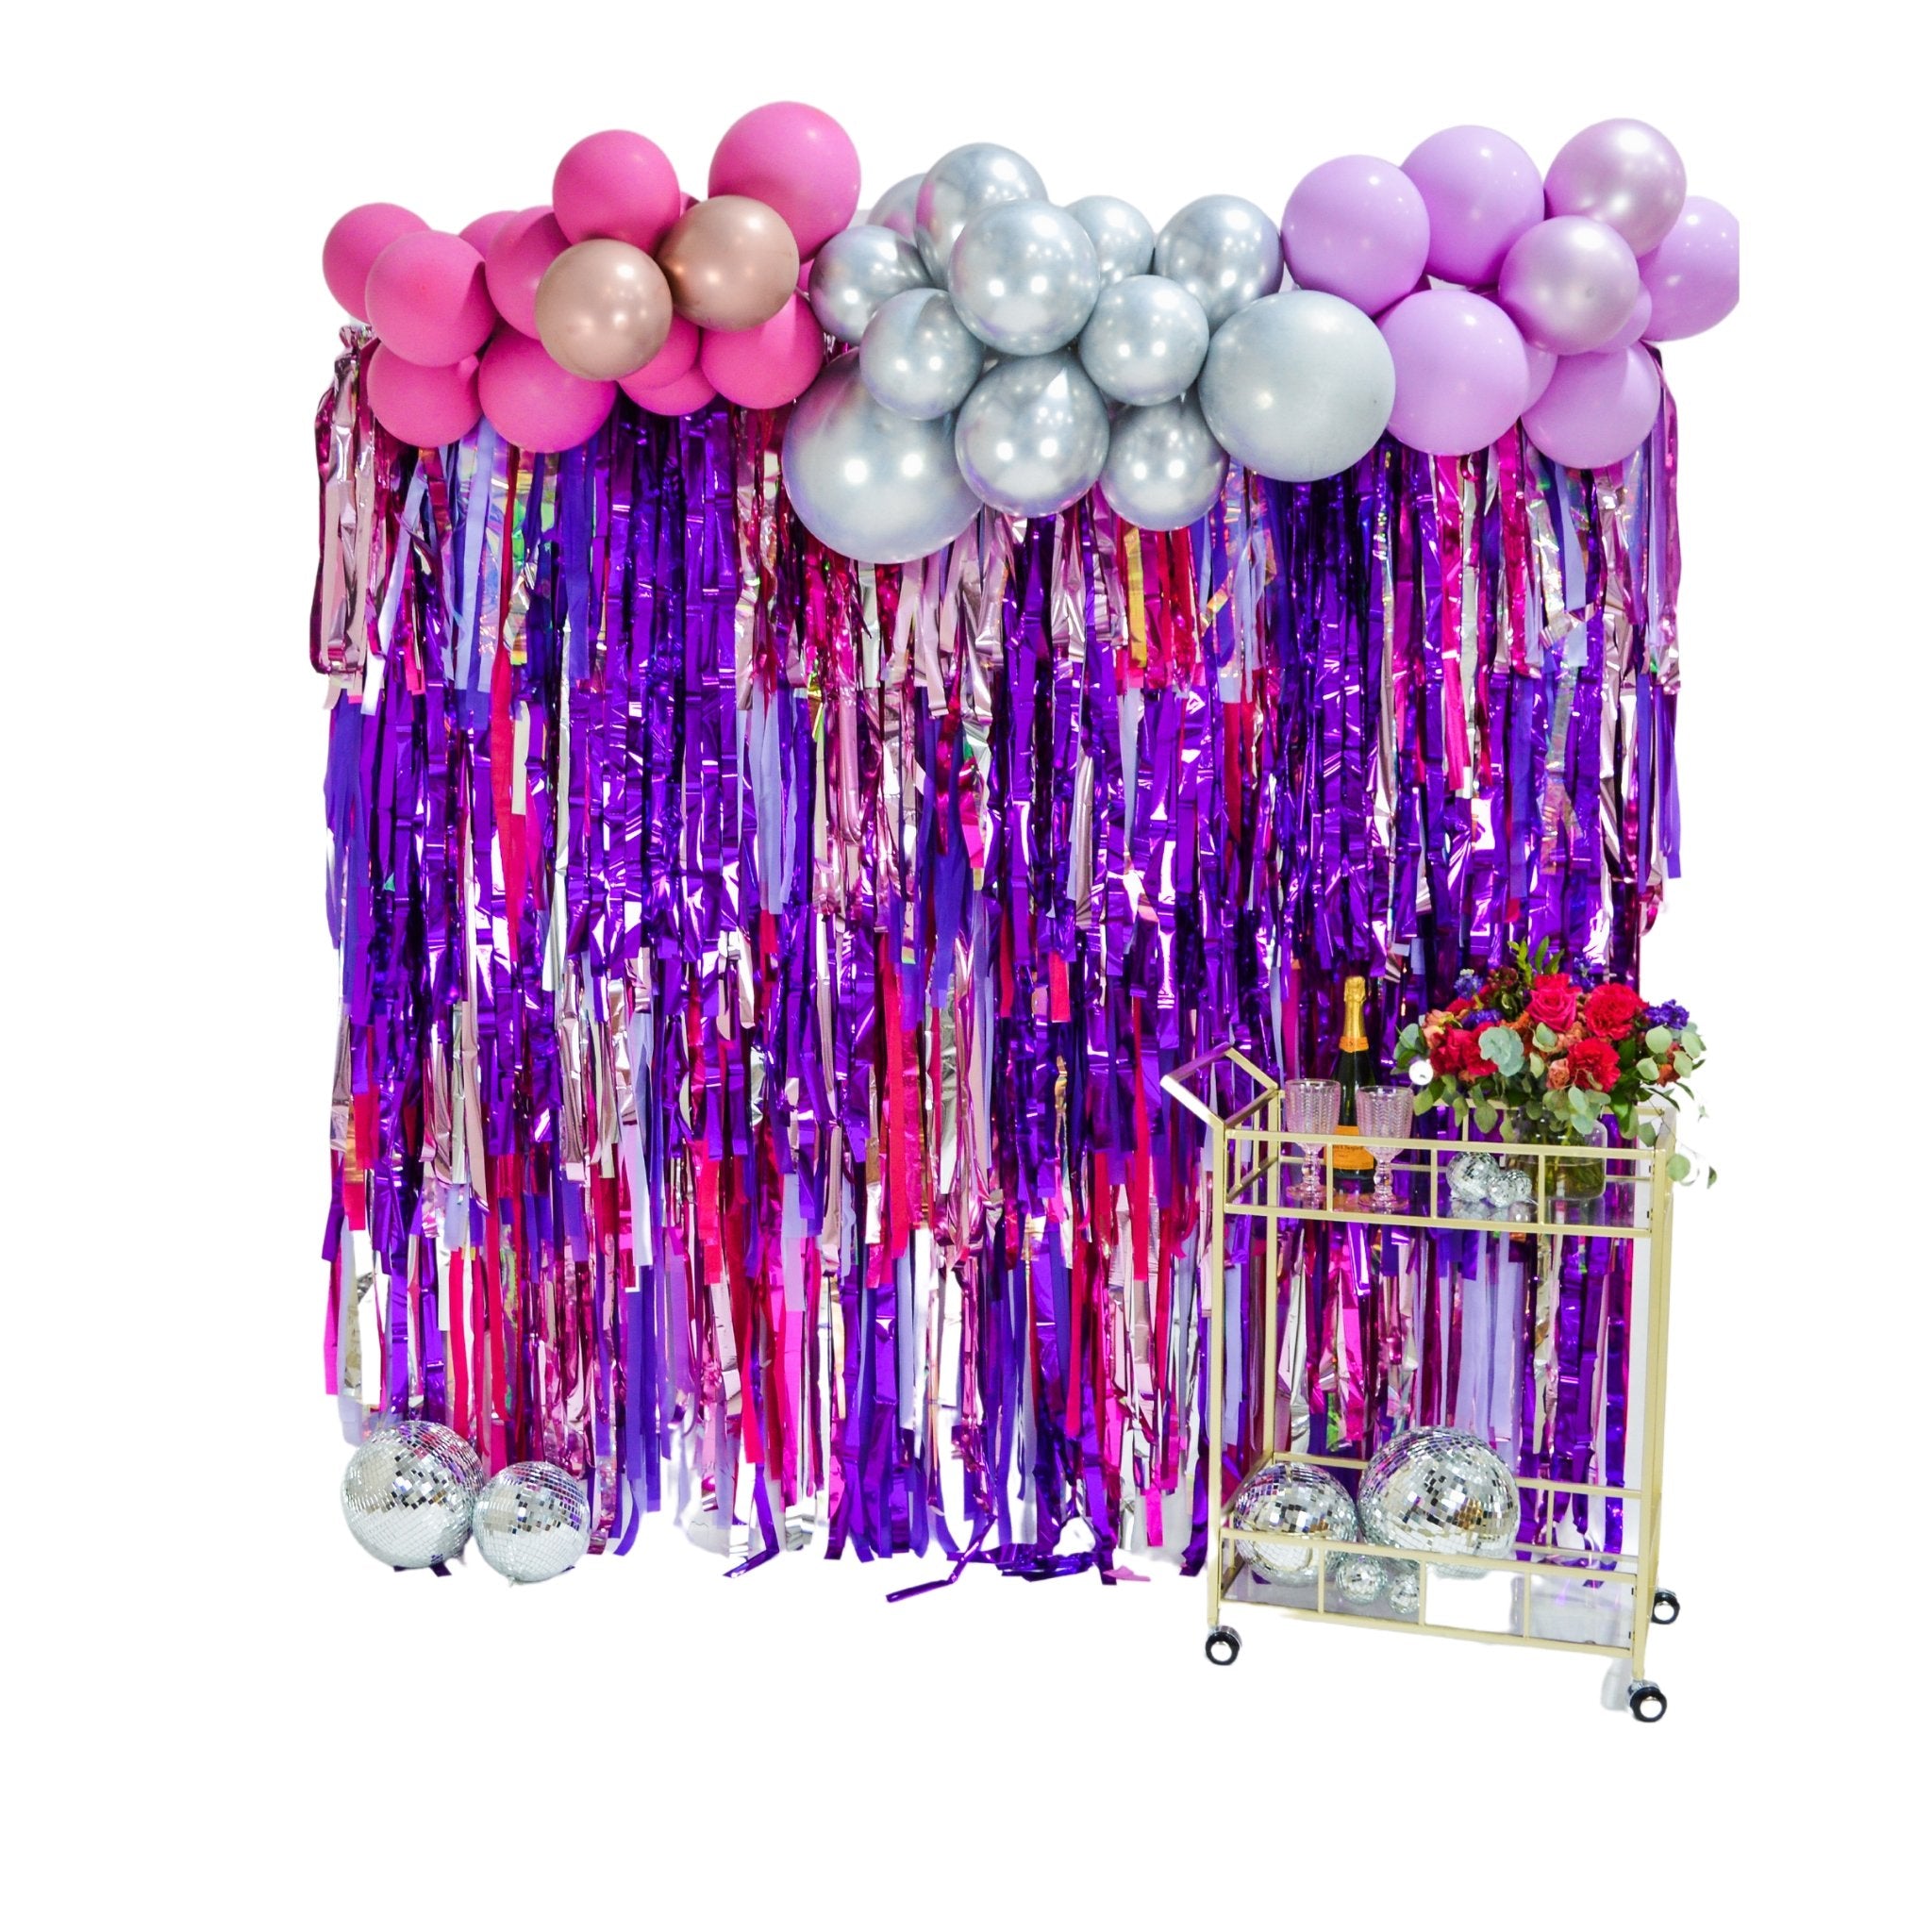 Euphoria Fringe Backdrop - Oh My Darling Party Co-bachelorette partybirthday partychristmas 22 #Fringe_Backdrop#